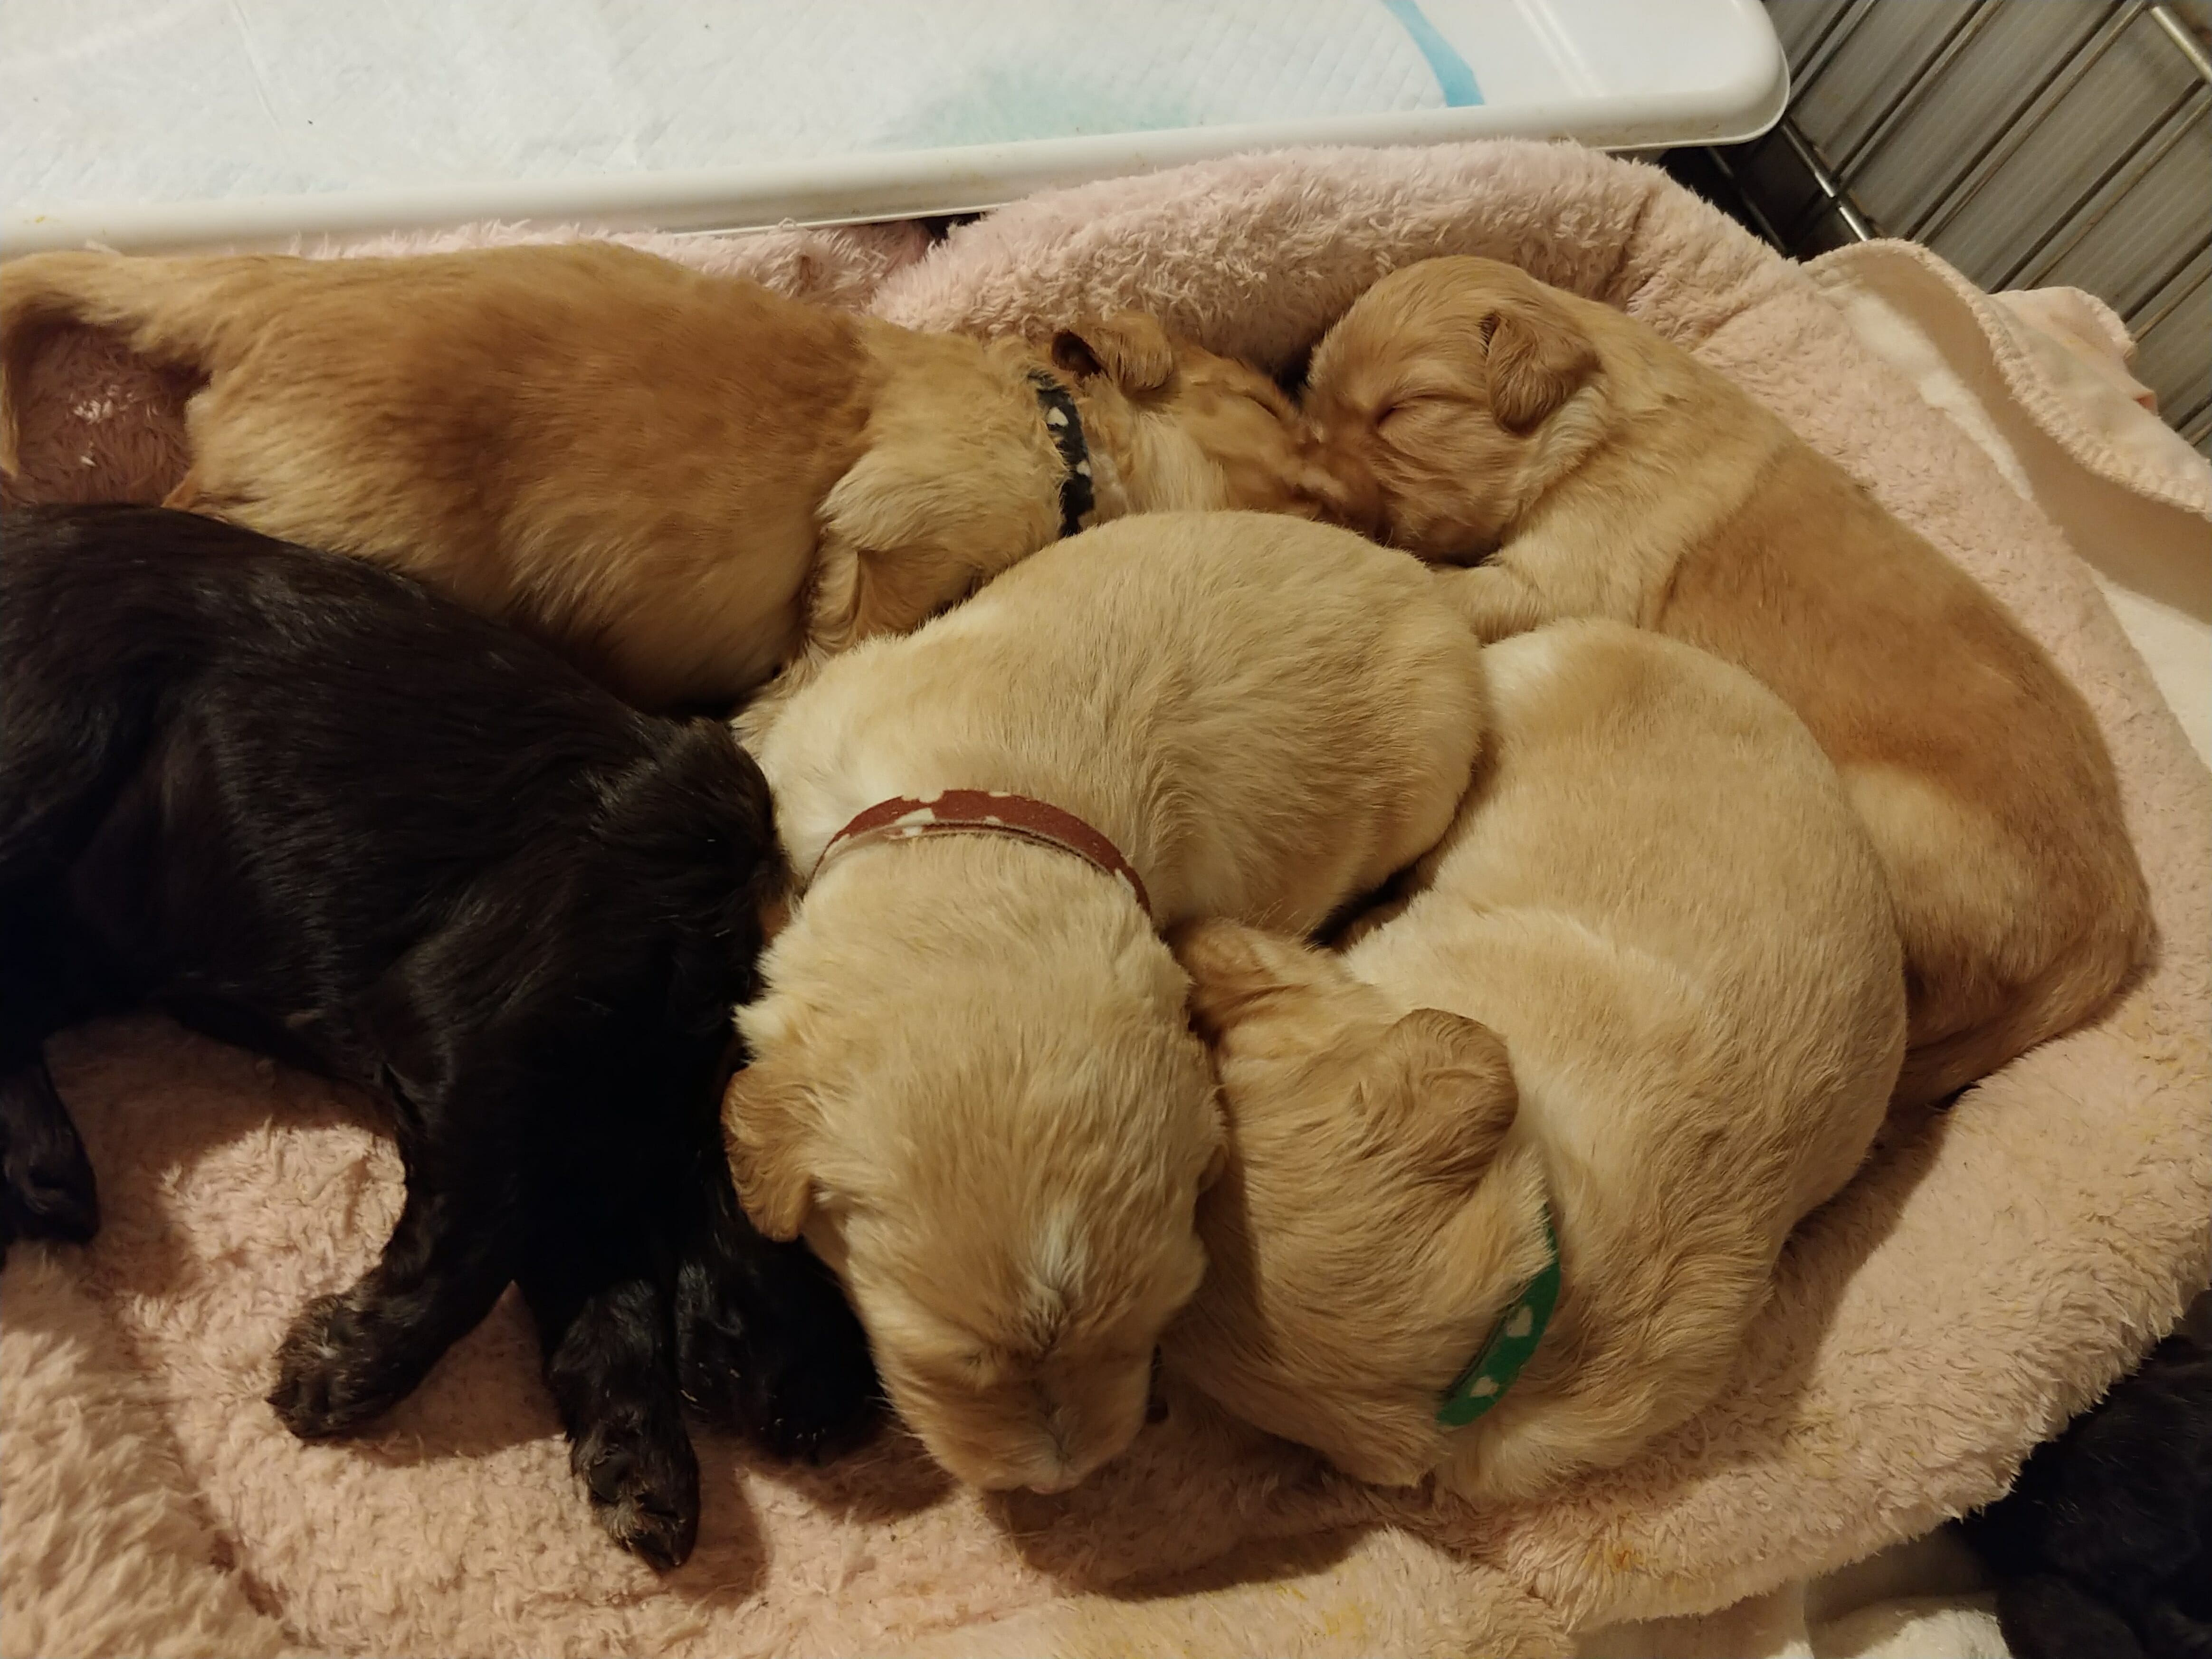 Five labradoodle puppies snuggled in a bed; 4 caramel and one chocolate, 3 weeks old